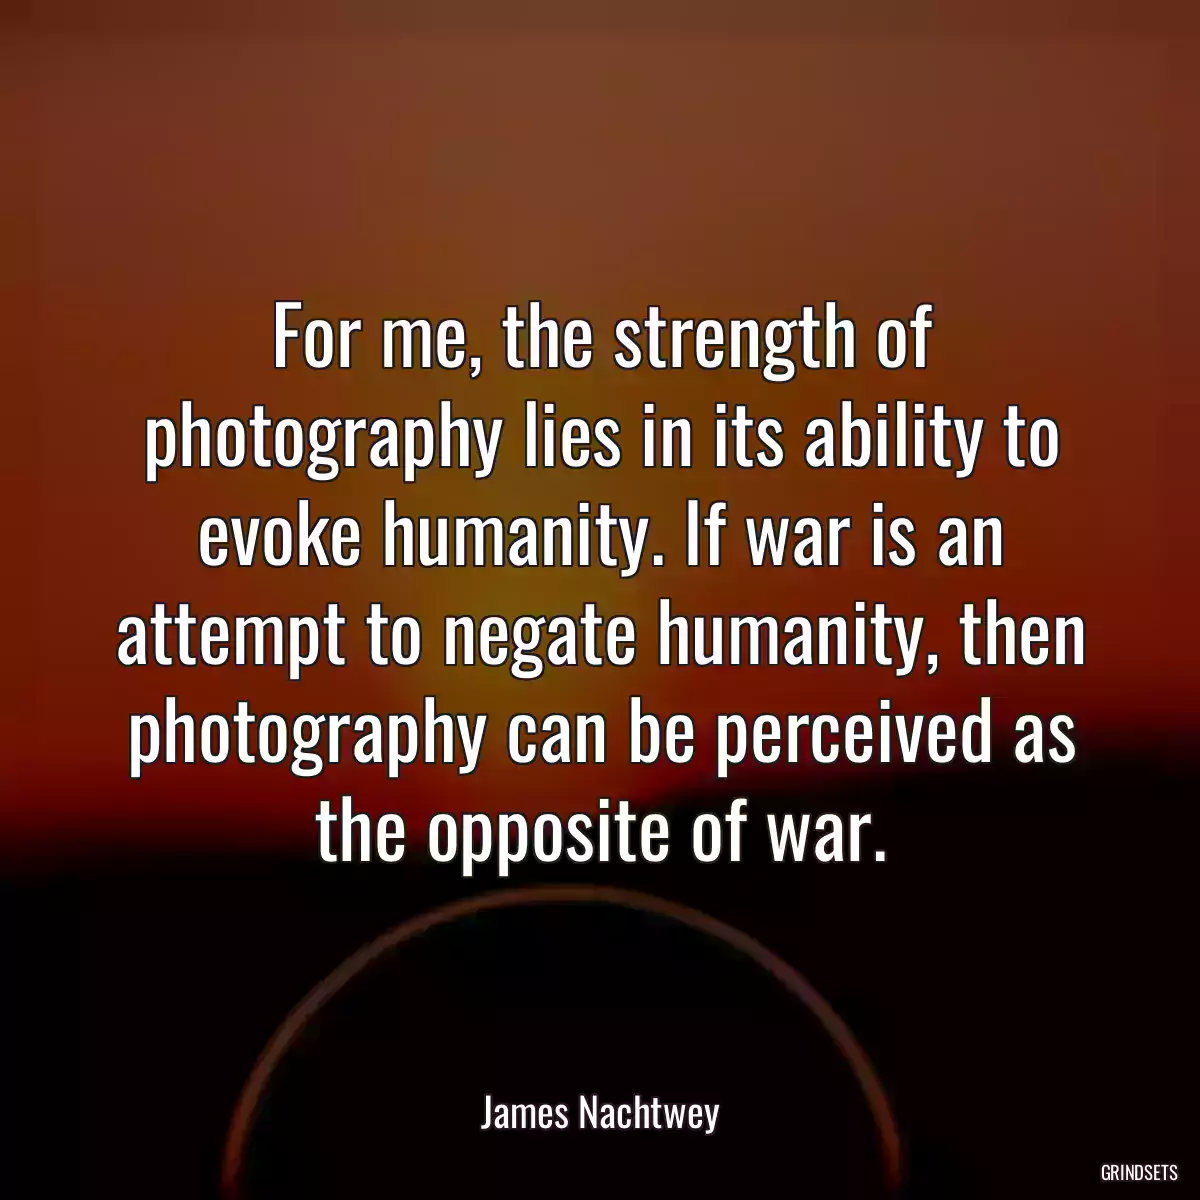 For me, the strength of photography lies in its ability to evoke humanity. If war is an attempt to negate humanity, then photography can be perceived as the opposite of war.